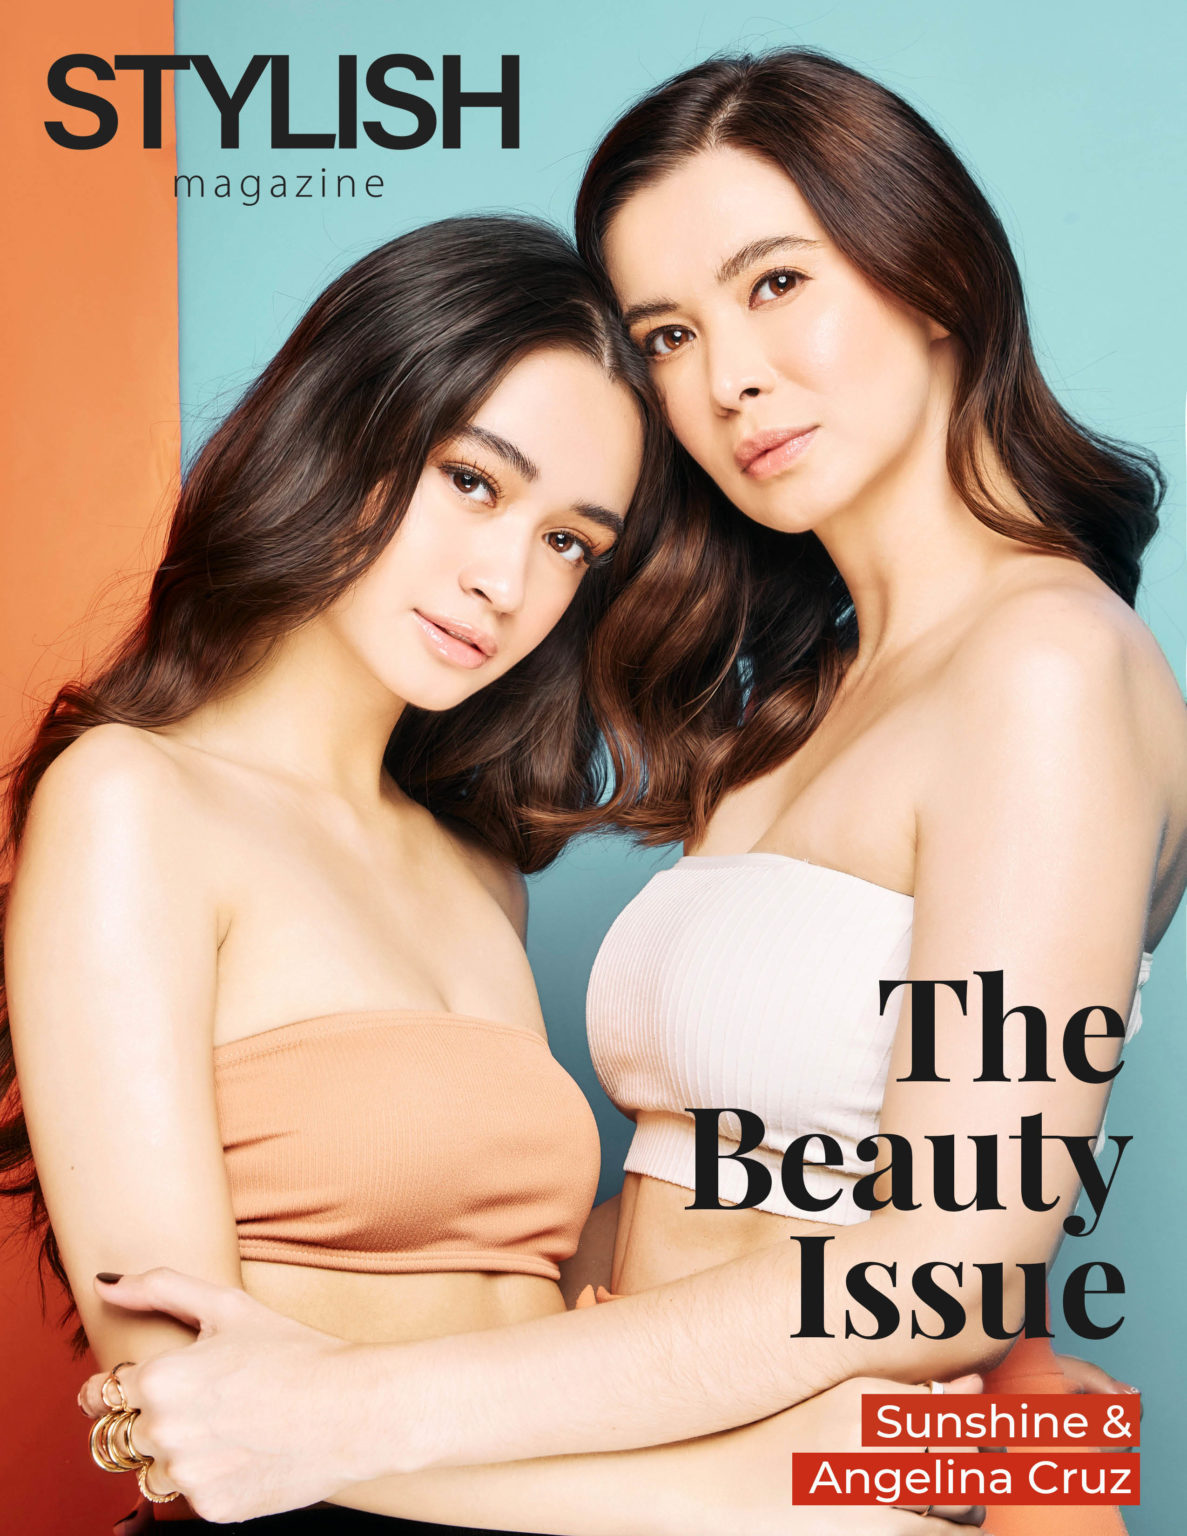 The Beauty Issue Flippable Format